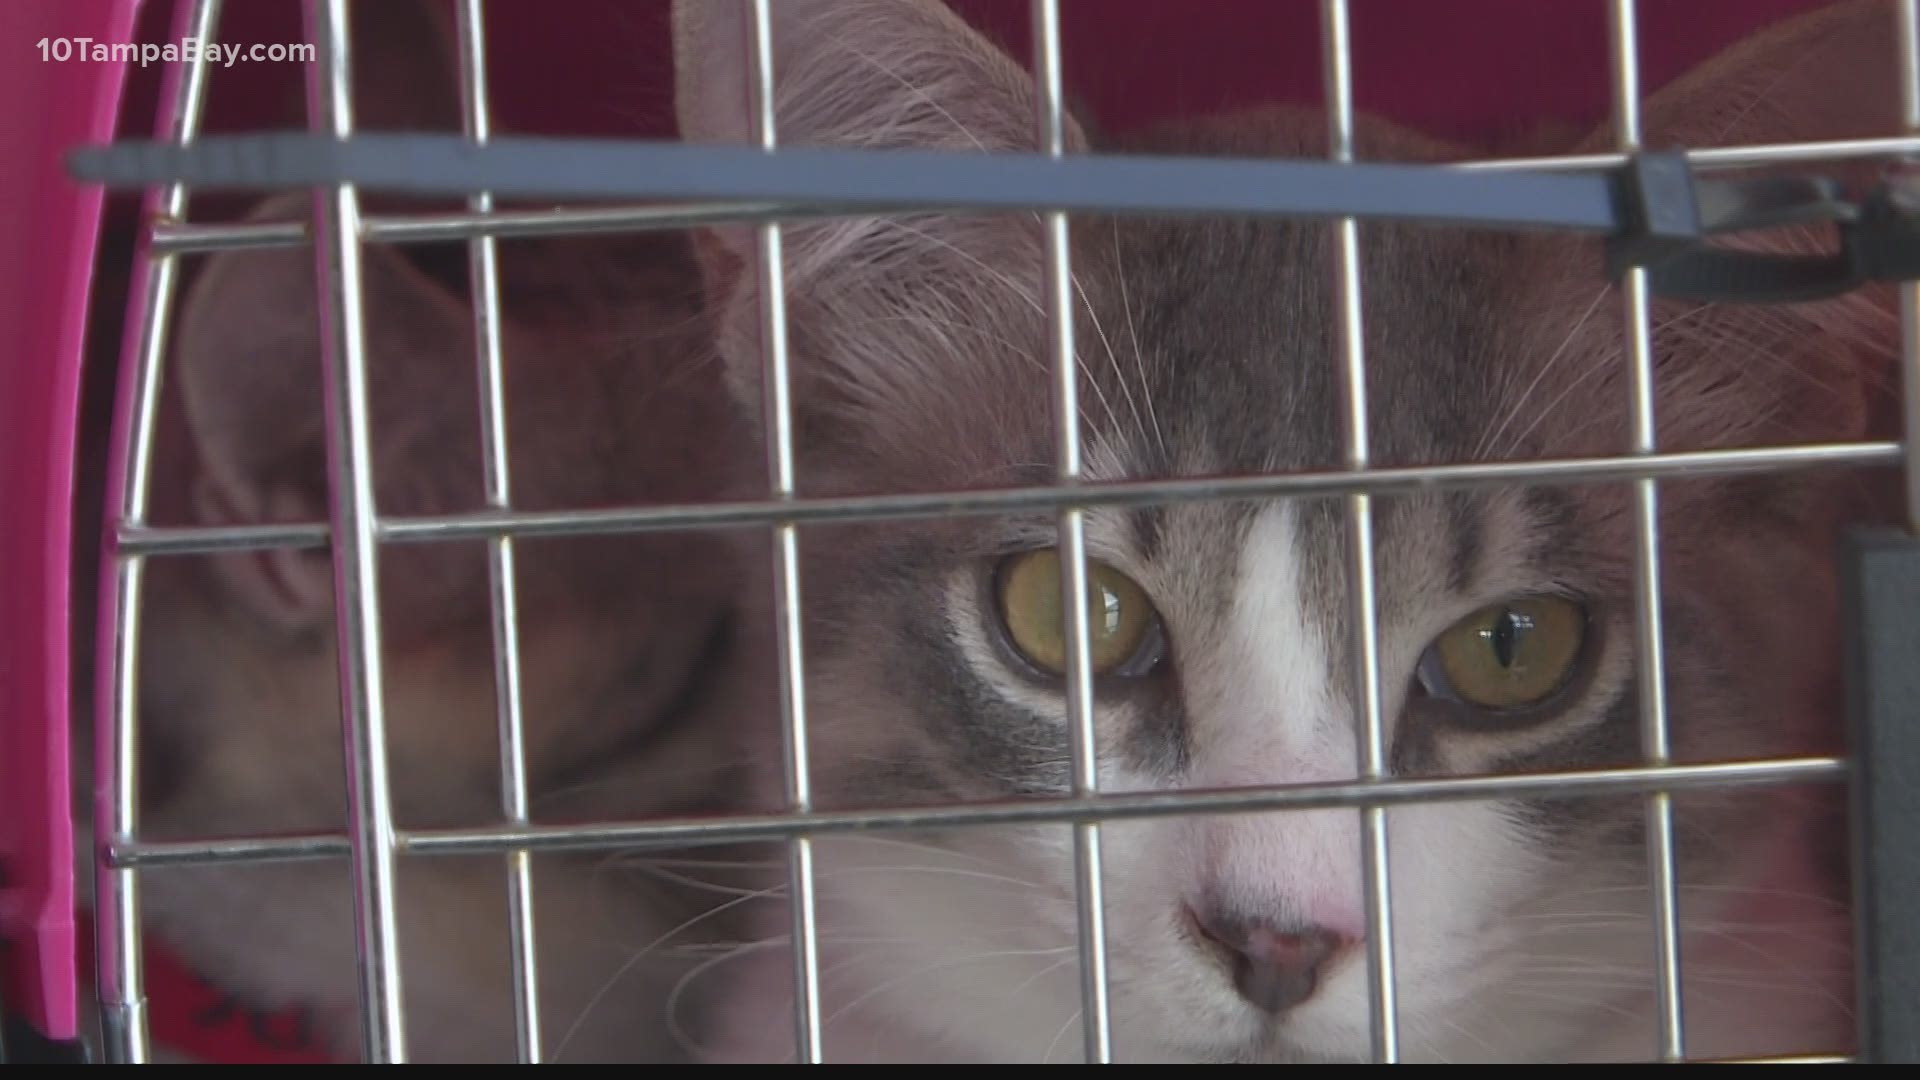 SPCA Florida is partnering with Fayette Regional Humane Society to help find 25 cats and kittens a new forever home.